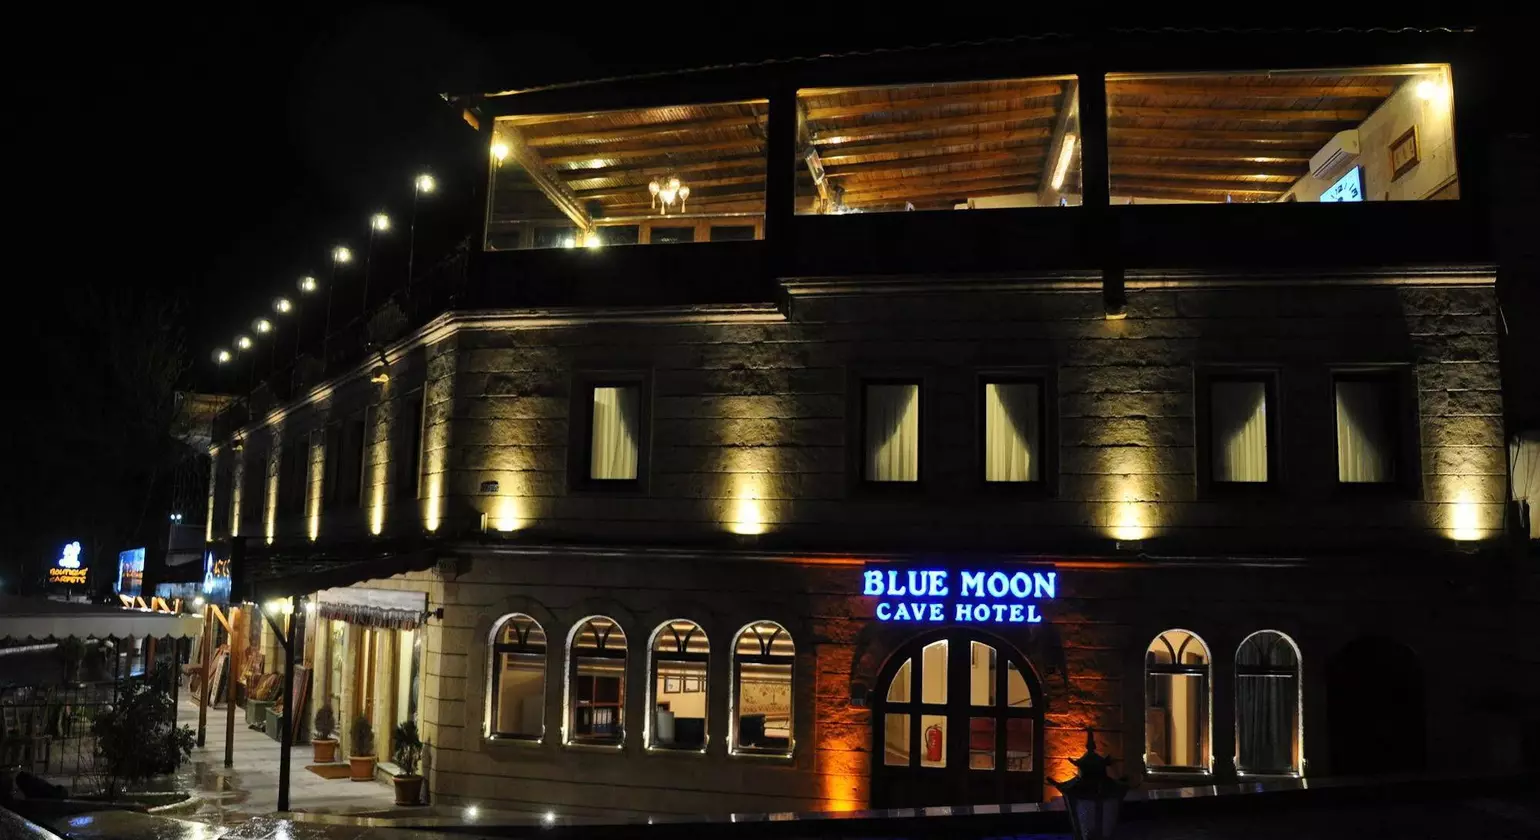 Blue Moon Cave Hotel